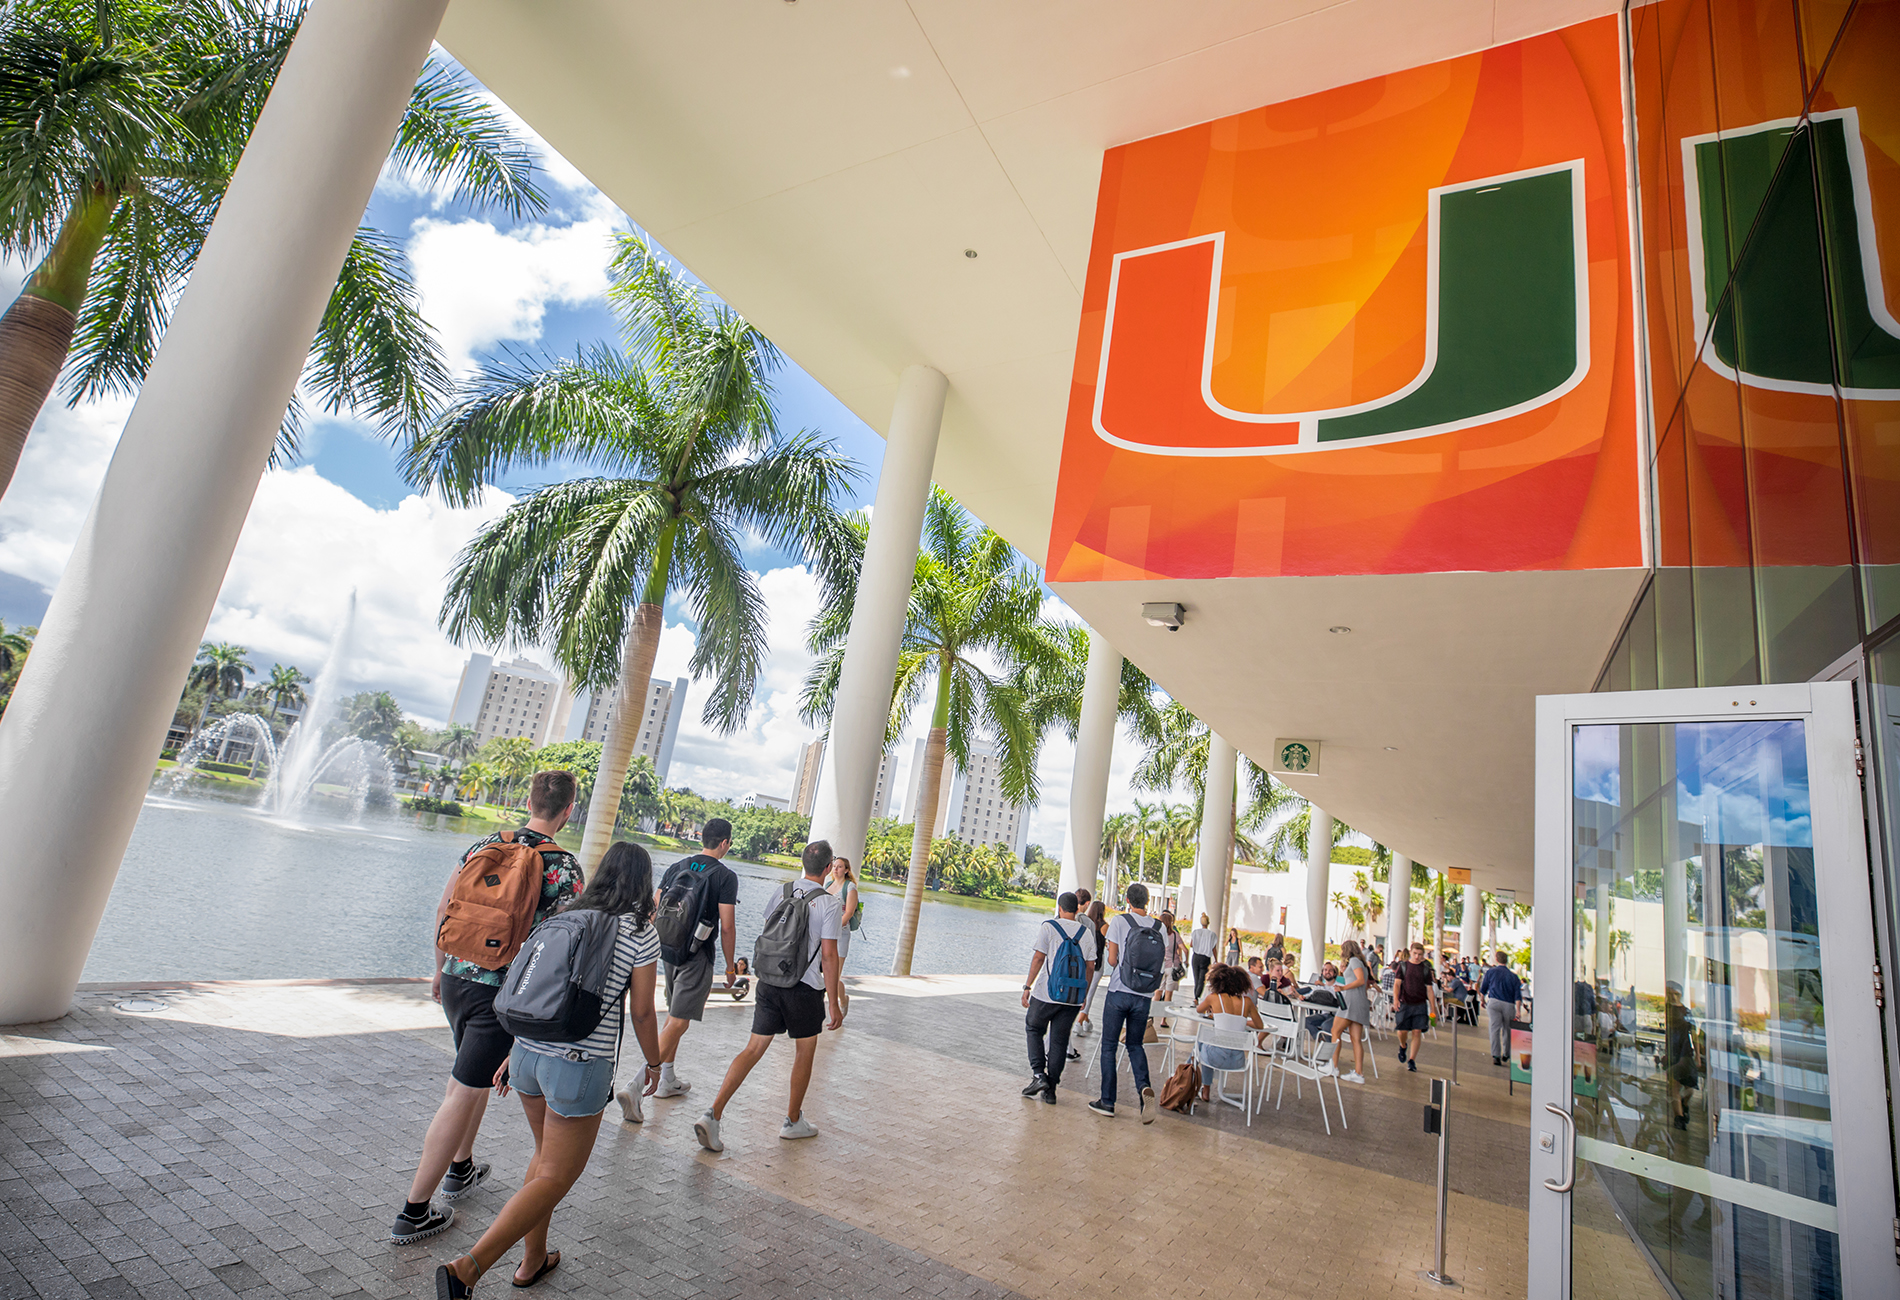 Students walking through a University of Miami campus building.